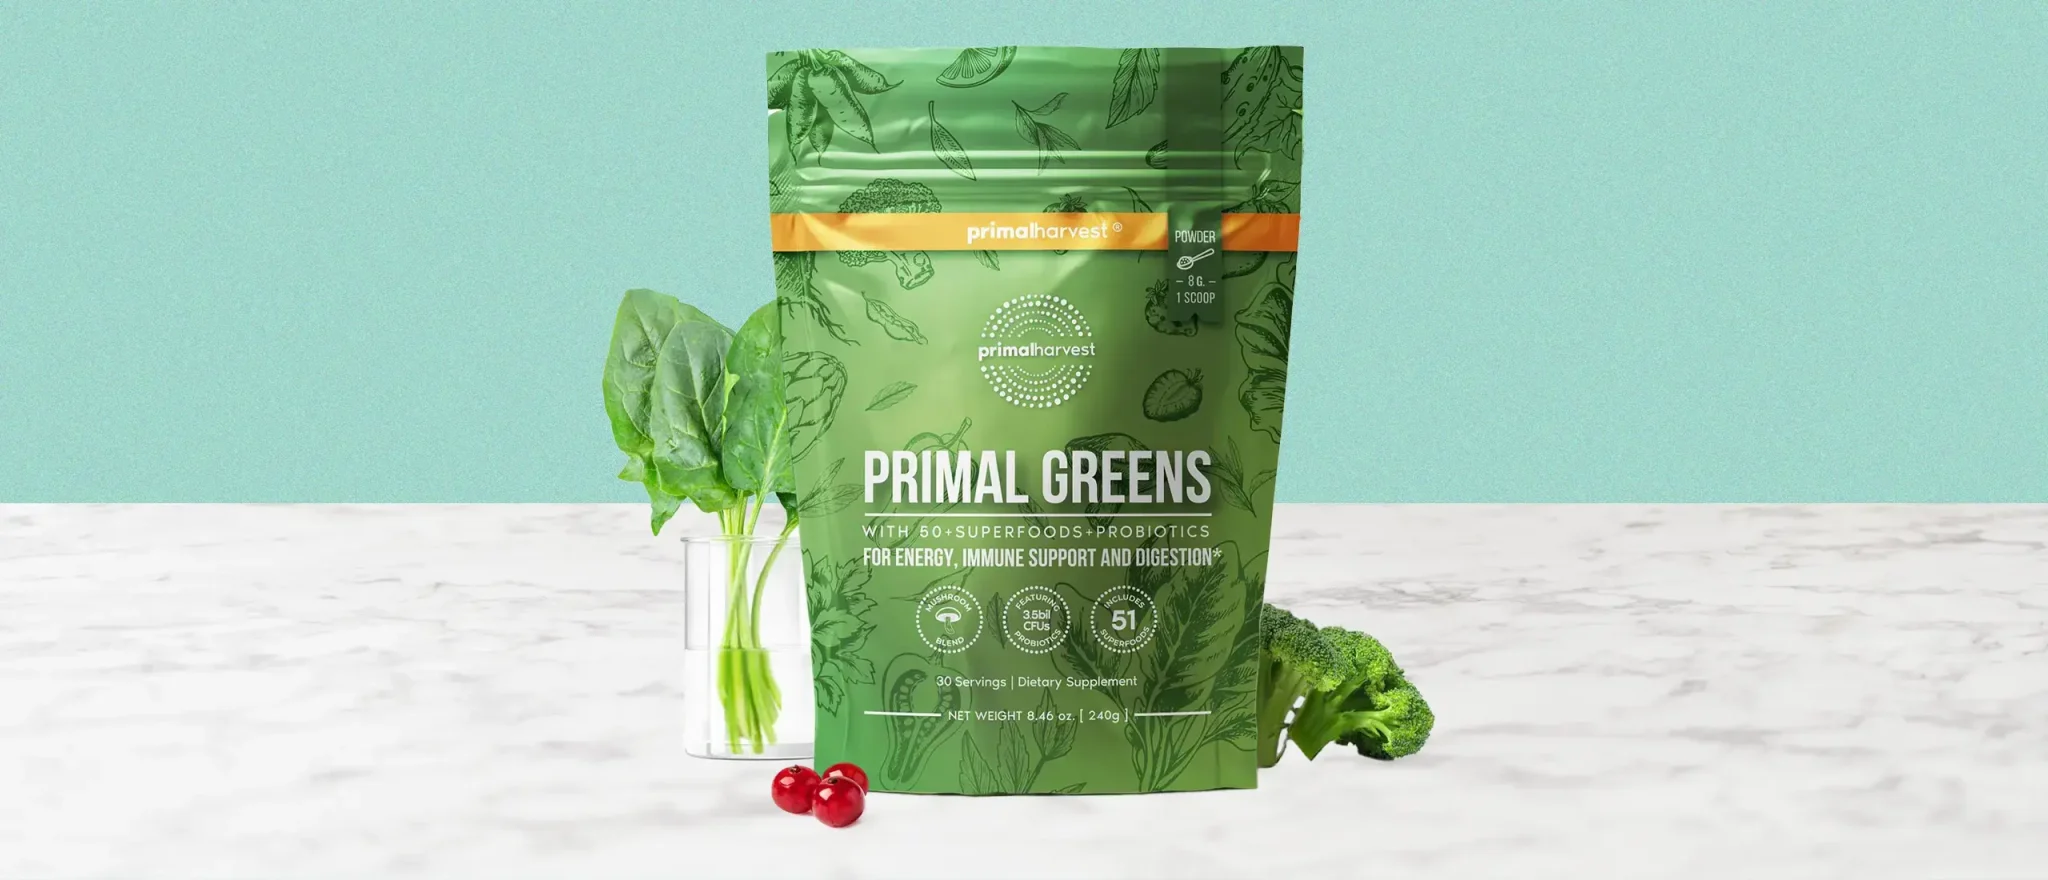 Our Honest Review of Primal Greens